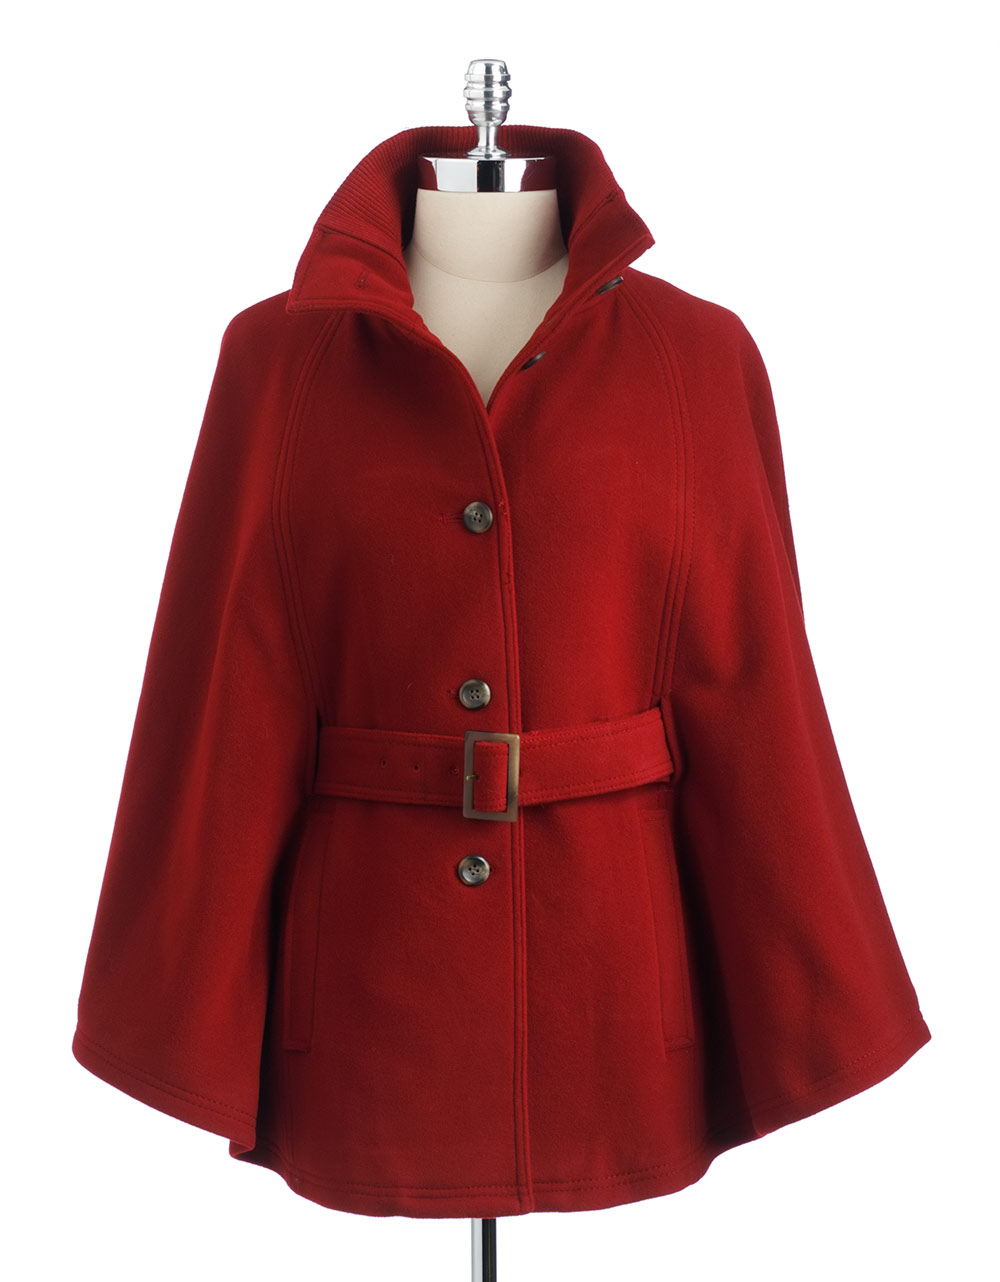 Lyst - Cole Haan Belted Cape Coat in Red